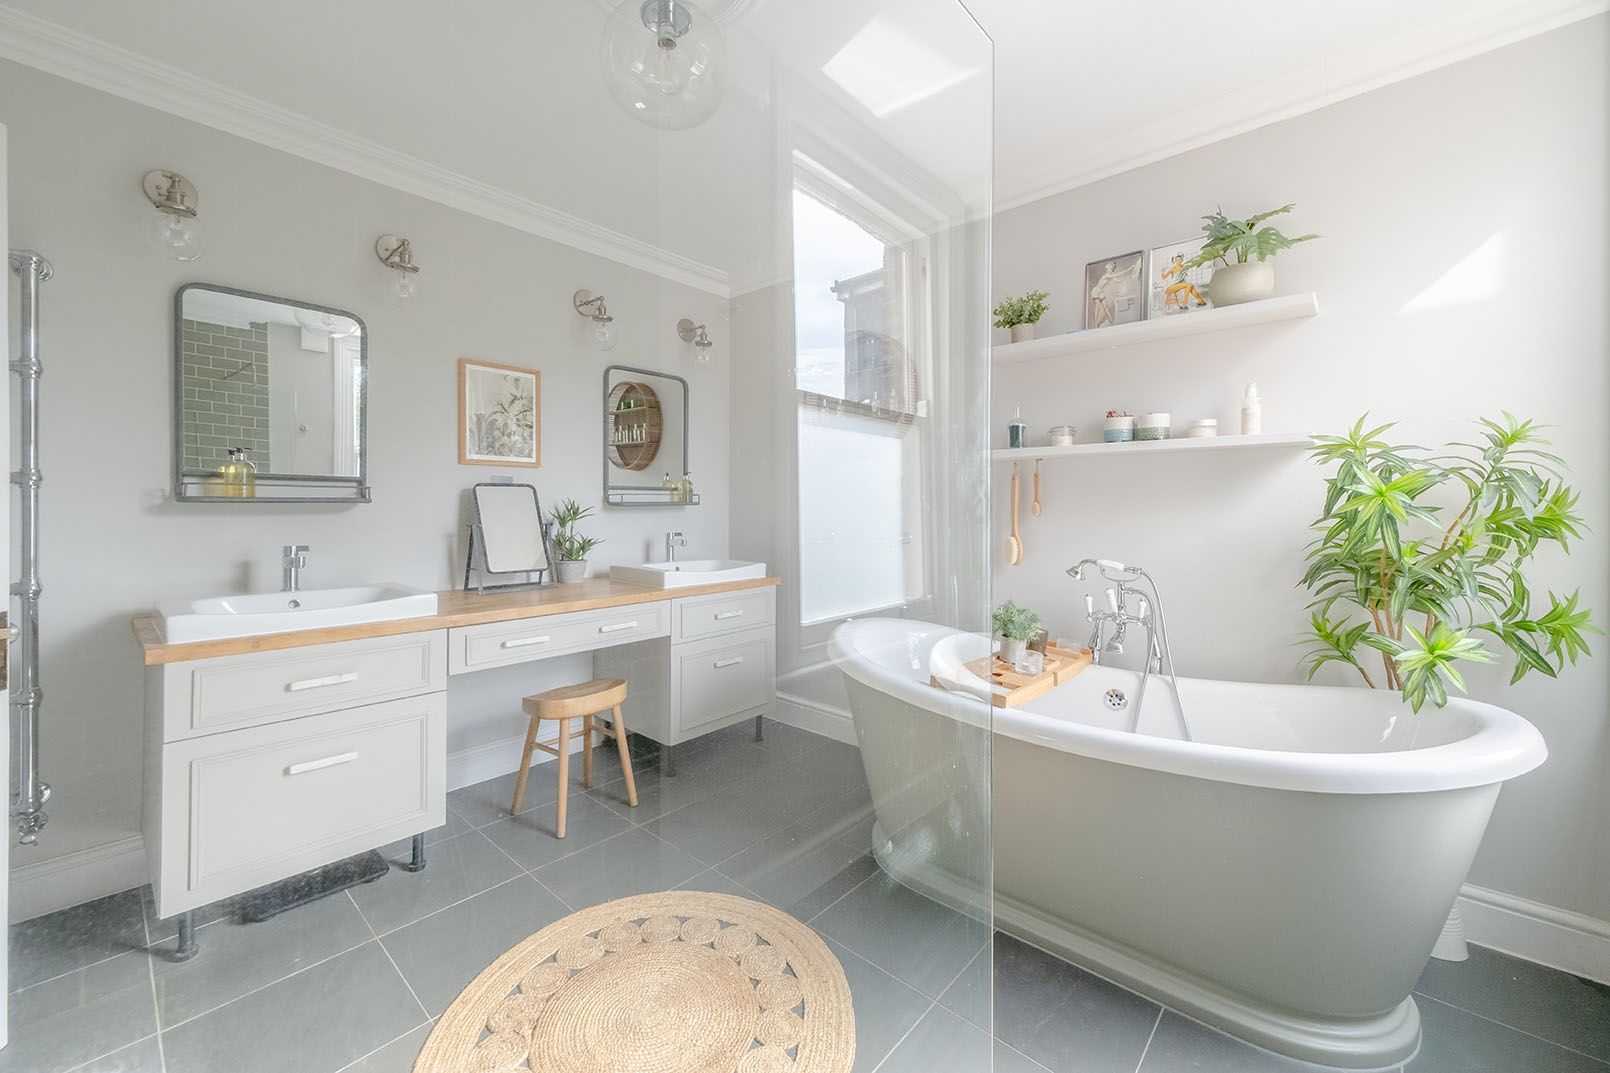 a bathroom photo from a property photography series, natural colours, bright and modern design space, light grey walls, a double sink counter with wooden material, a bathtub is seen behind a shower screen